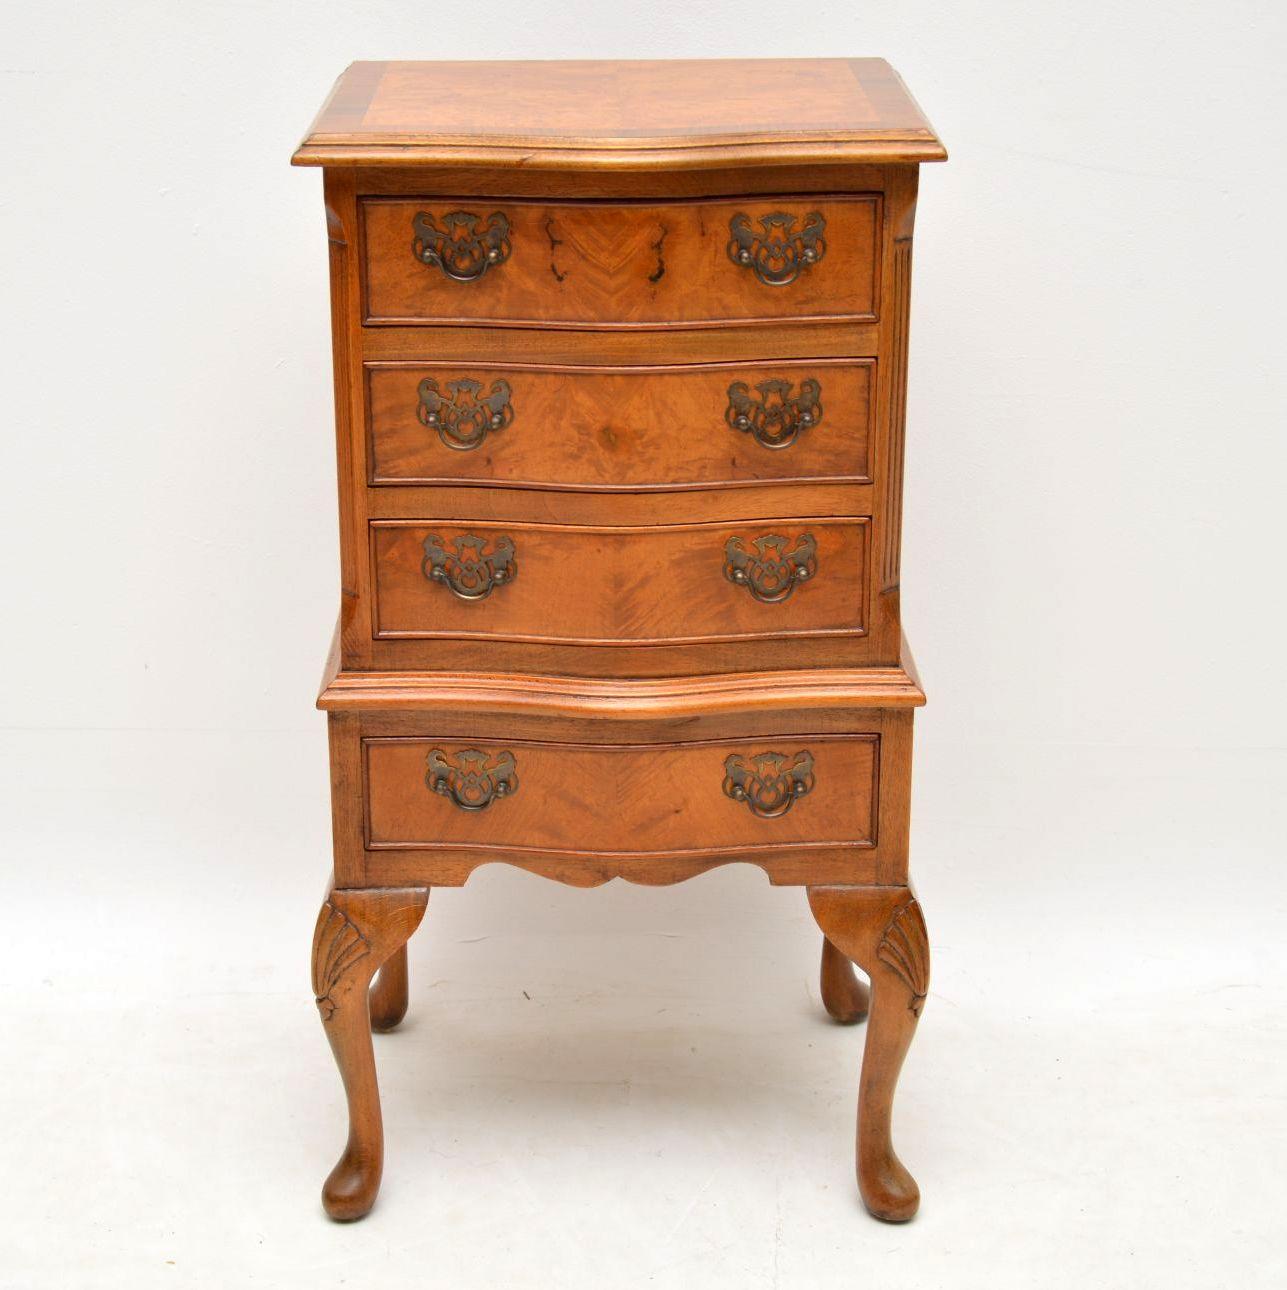 This small antique burr walnut chest of drawers is in good condition & has a lovely warm colour. It has a serpentine shaped front, a crossbanded top, reeded canted corners & sits on shaped legs with shell carvings. The drawers have the original